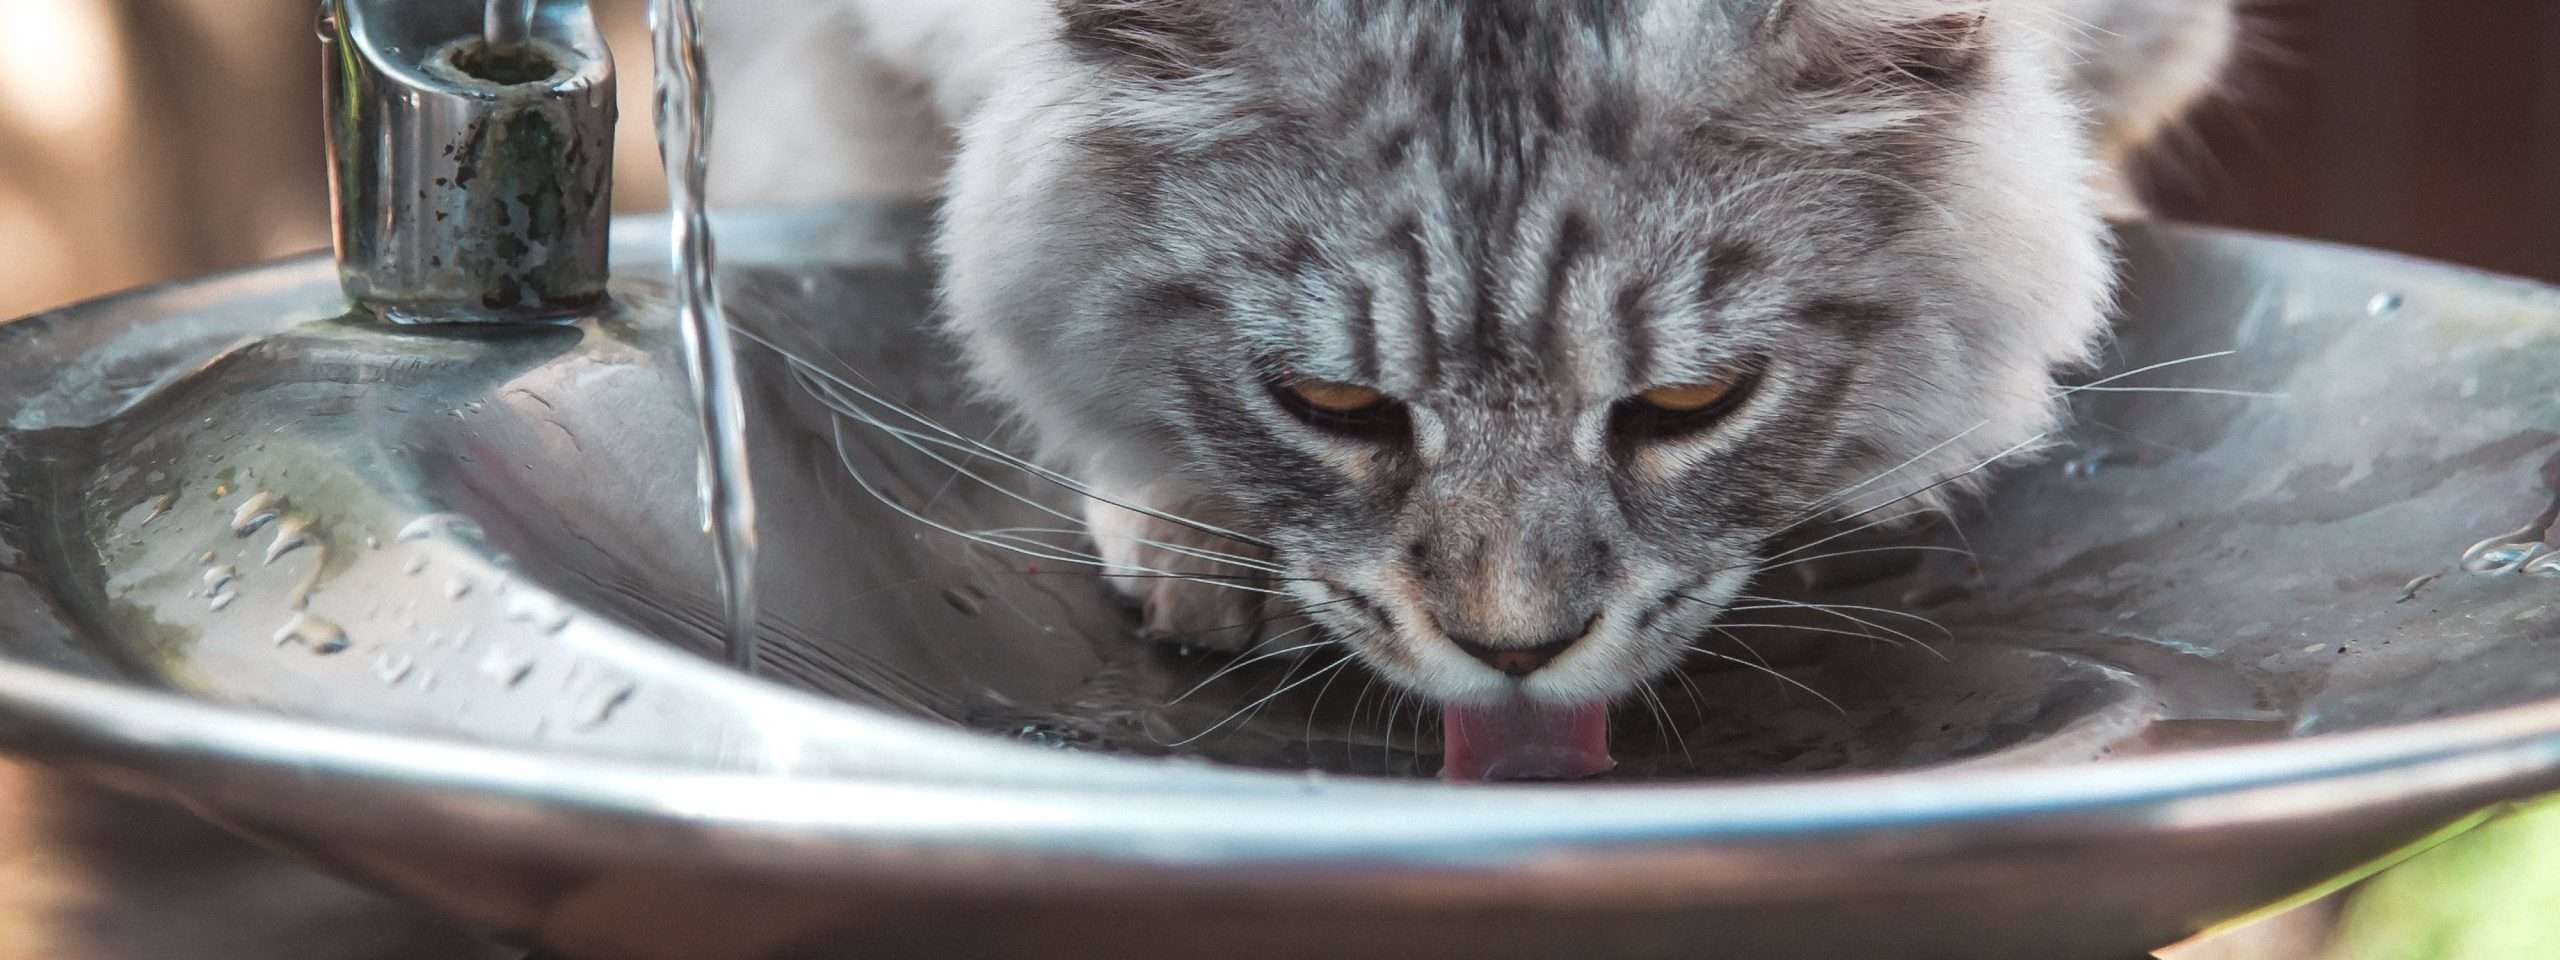 Why do cats love wet food?